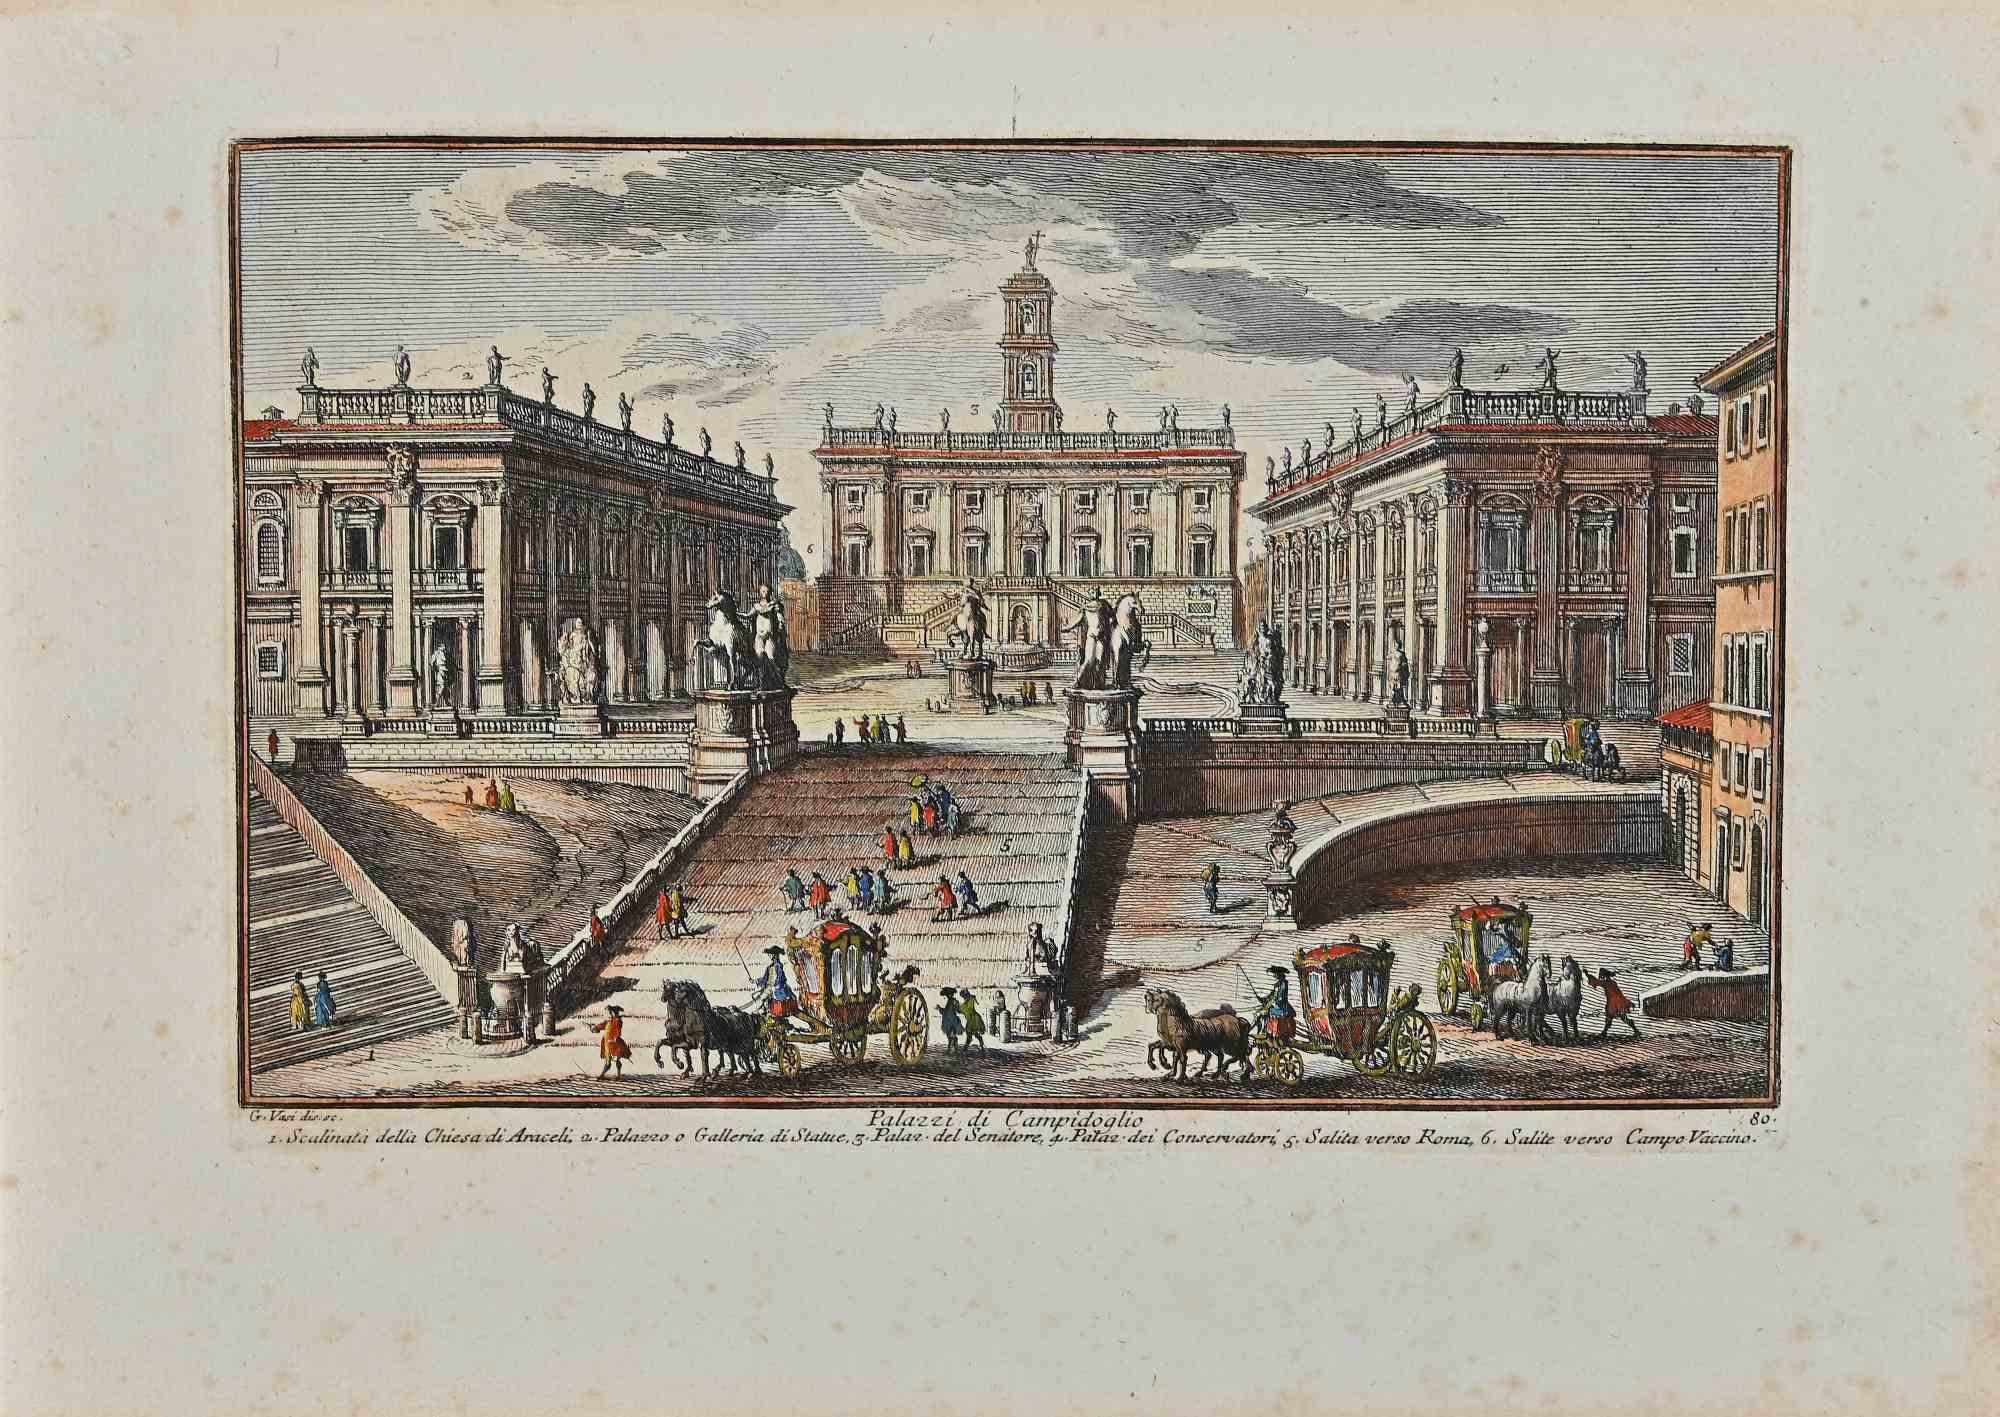 Palazzi di Campidoglio is an original etching of the Late 18th century realized by Giuseppe Vasi.

Signed and titled on plate lower margin. 

Good conditions and aged margins with some foxings.

Giuseppe Vasi  (Corleone,1710 - Rome, 1782) was an